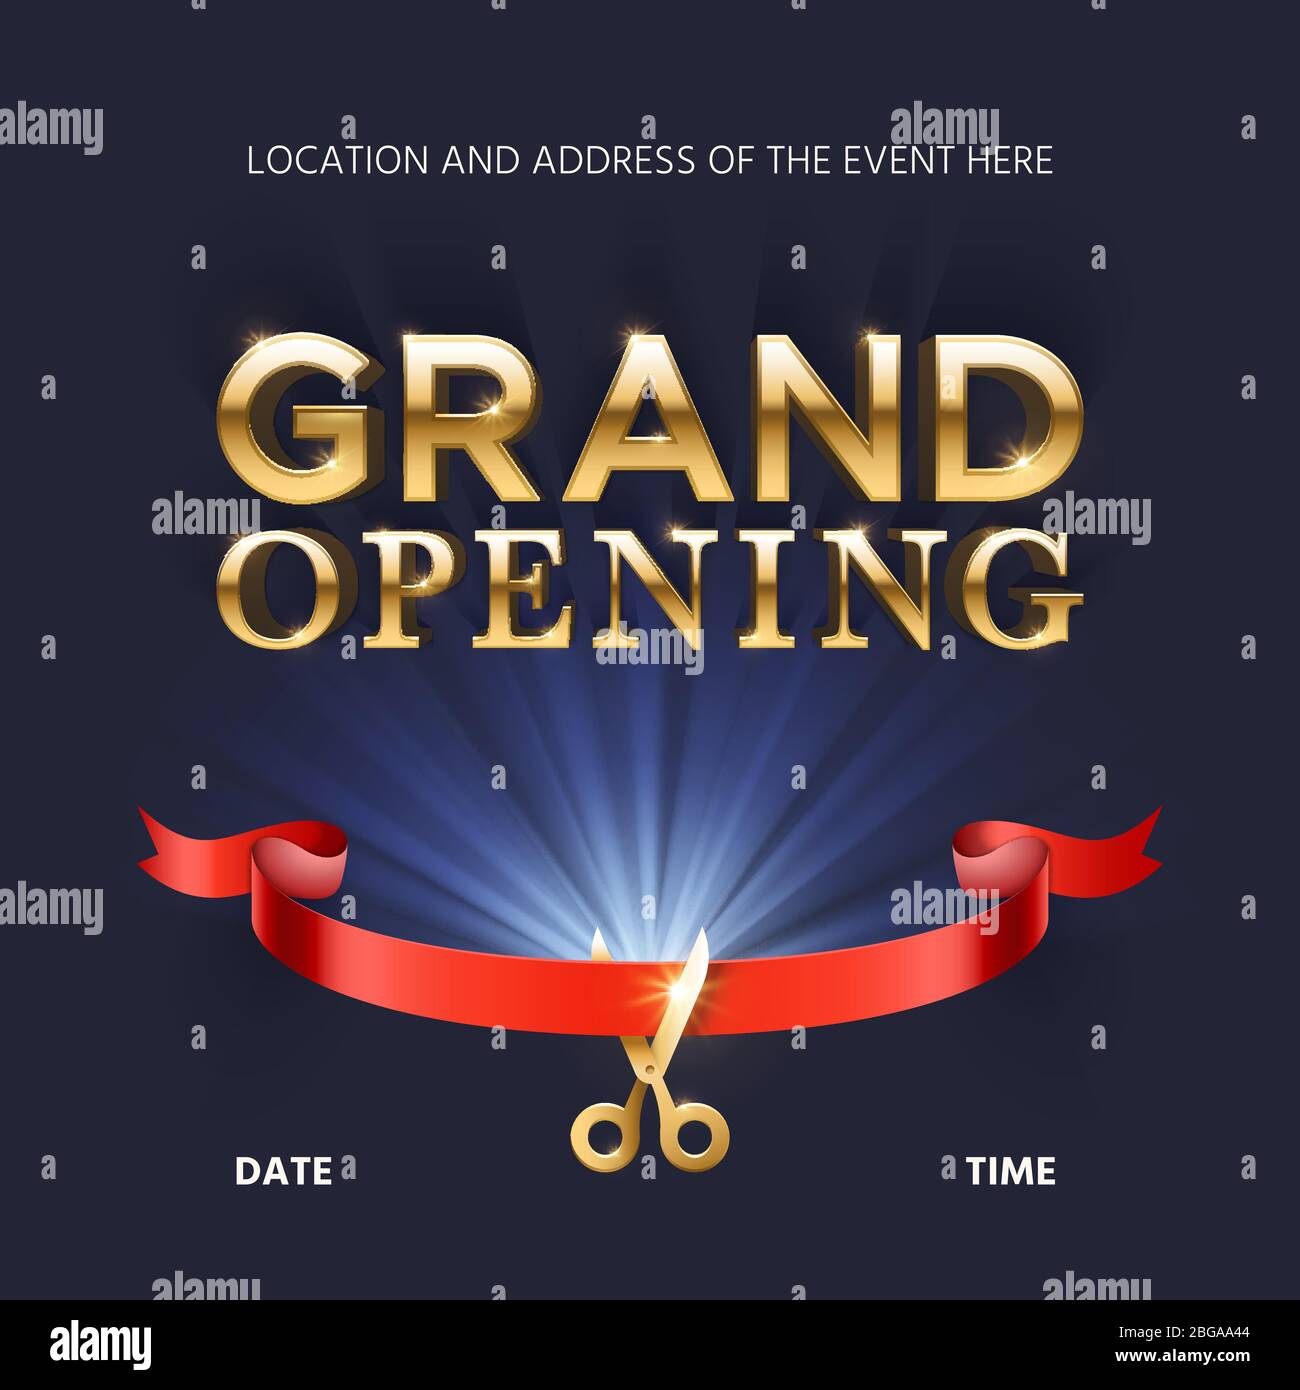 Grand opening ceremonial vector background with gold lettering. Ceremony open with red ribbon illustration Stock Vector